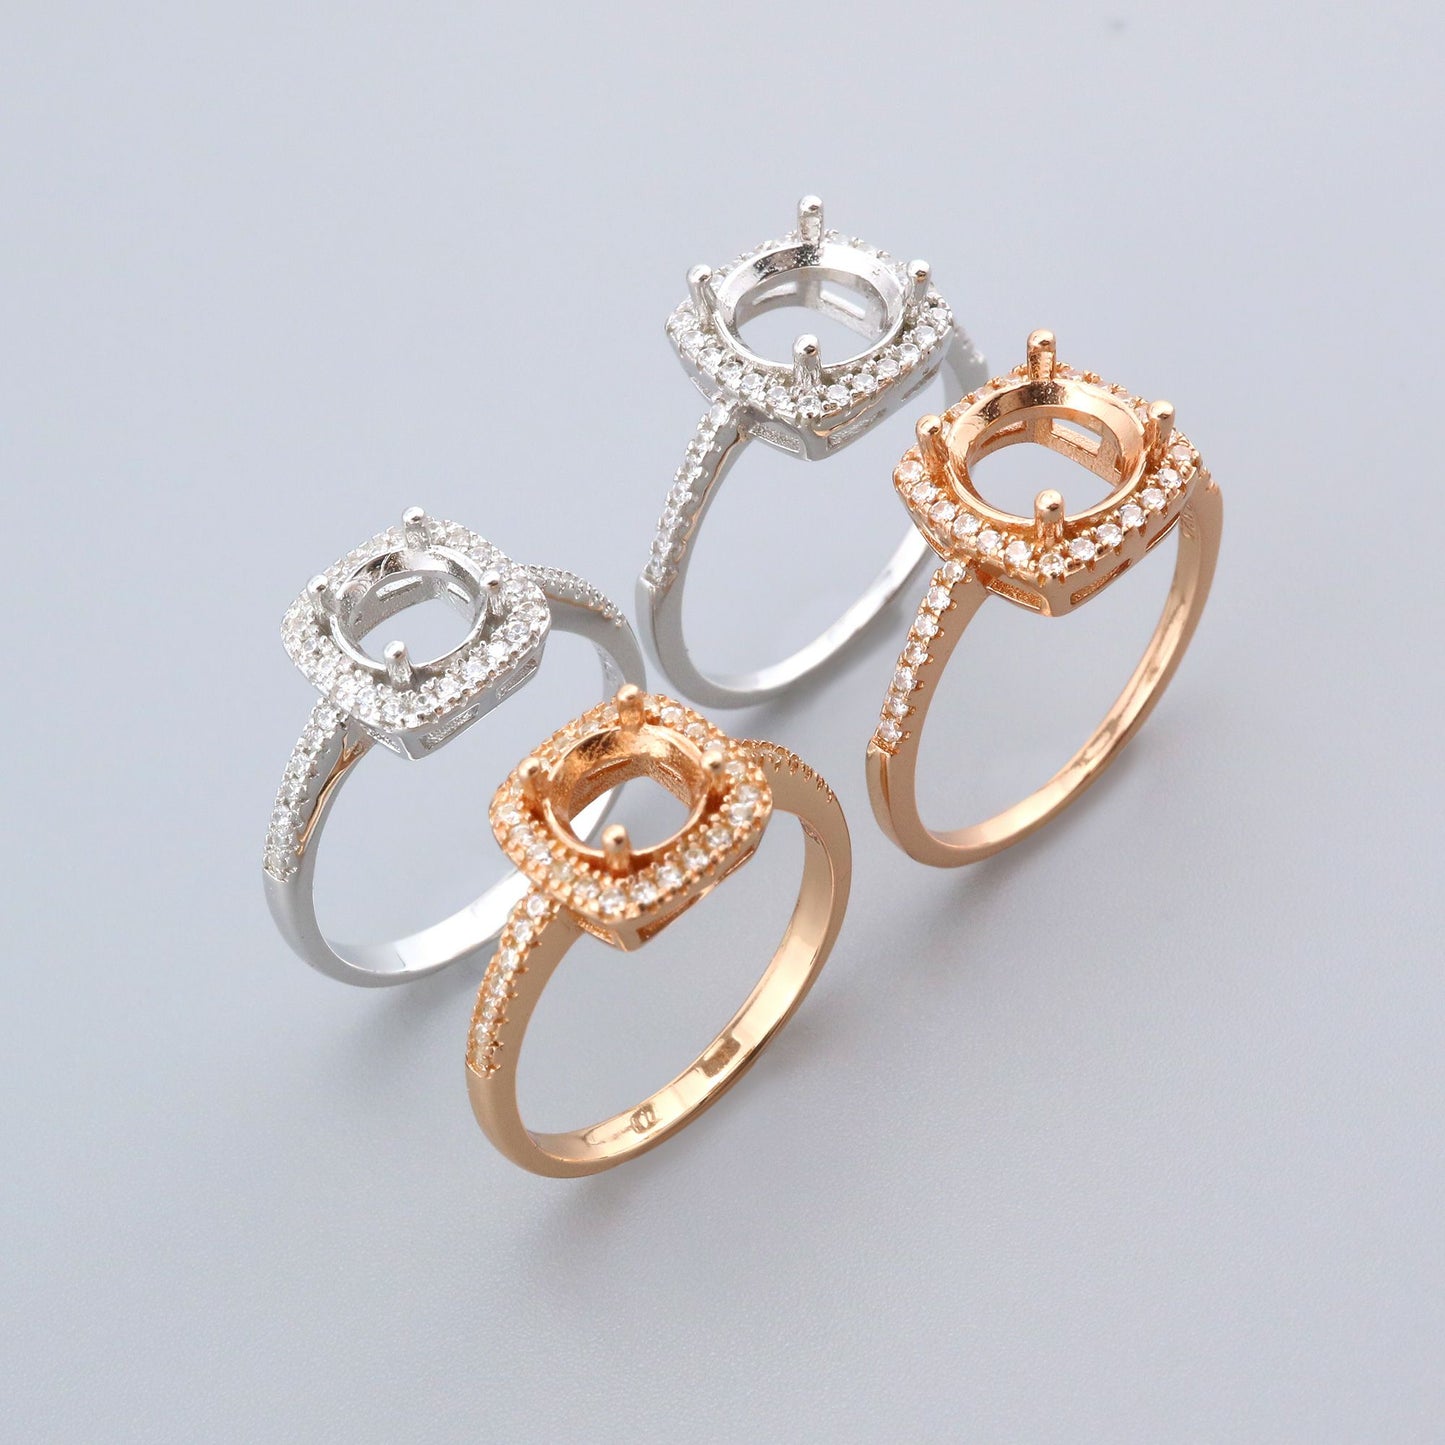 2 silver and 2 rose gold semi mounts for a round gem with a slightly squared halo.